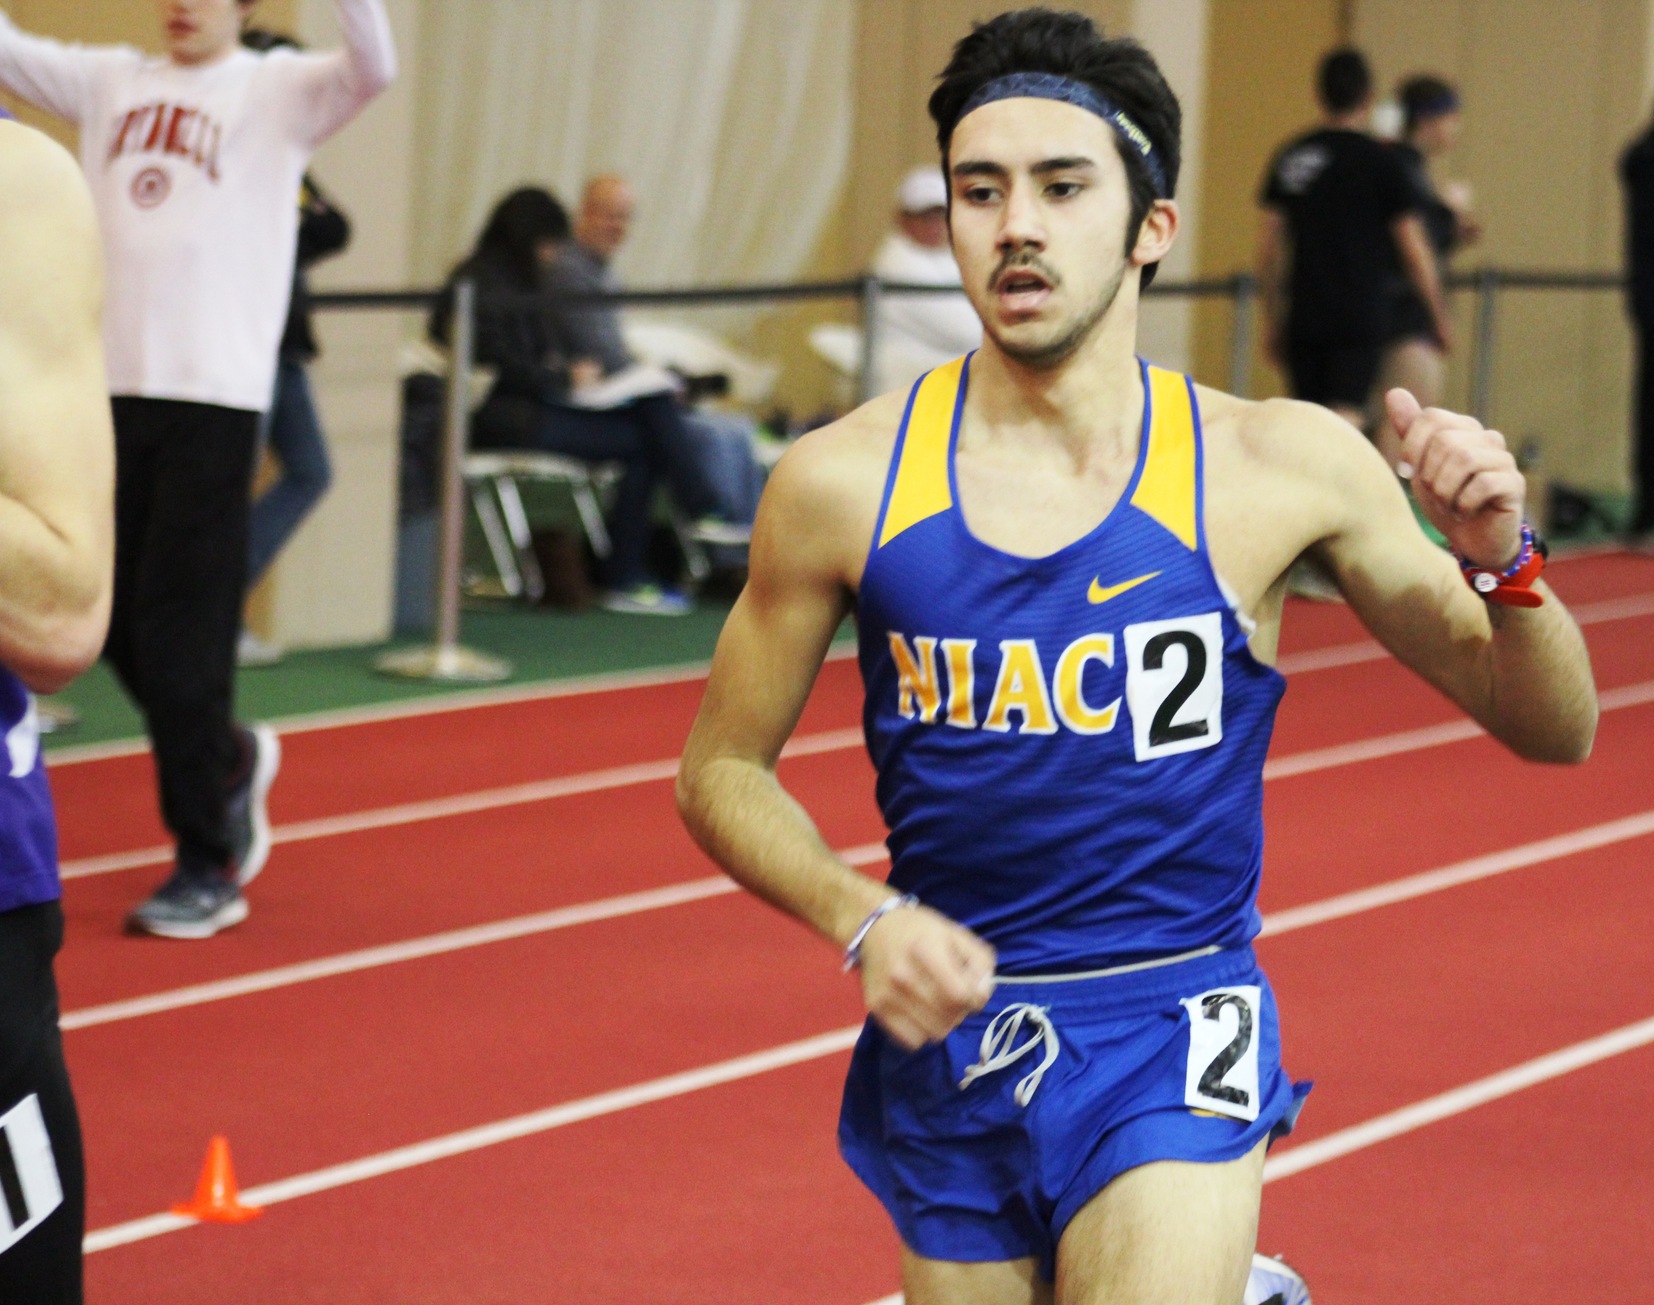 NIACC freshman Brian Jacques will run the 5,000-meter run and the mile at the NJCAA national indoor meet this weekend in Lubbock, Texas.